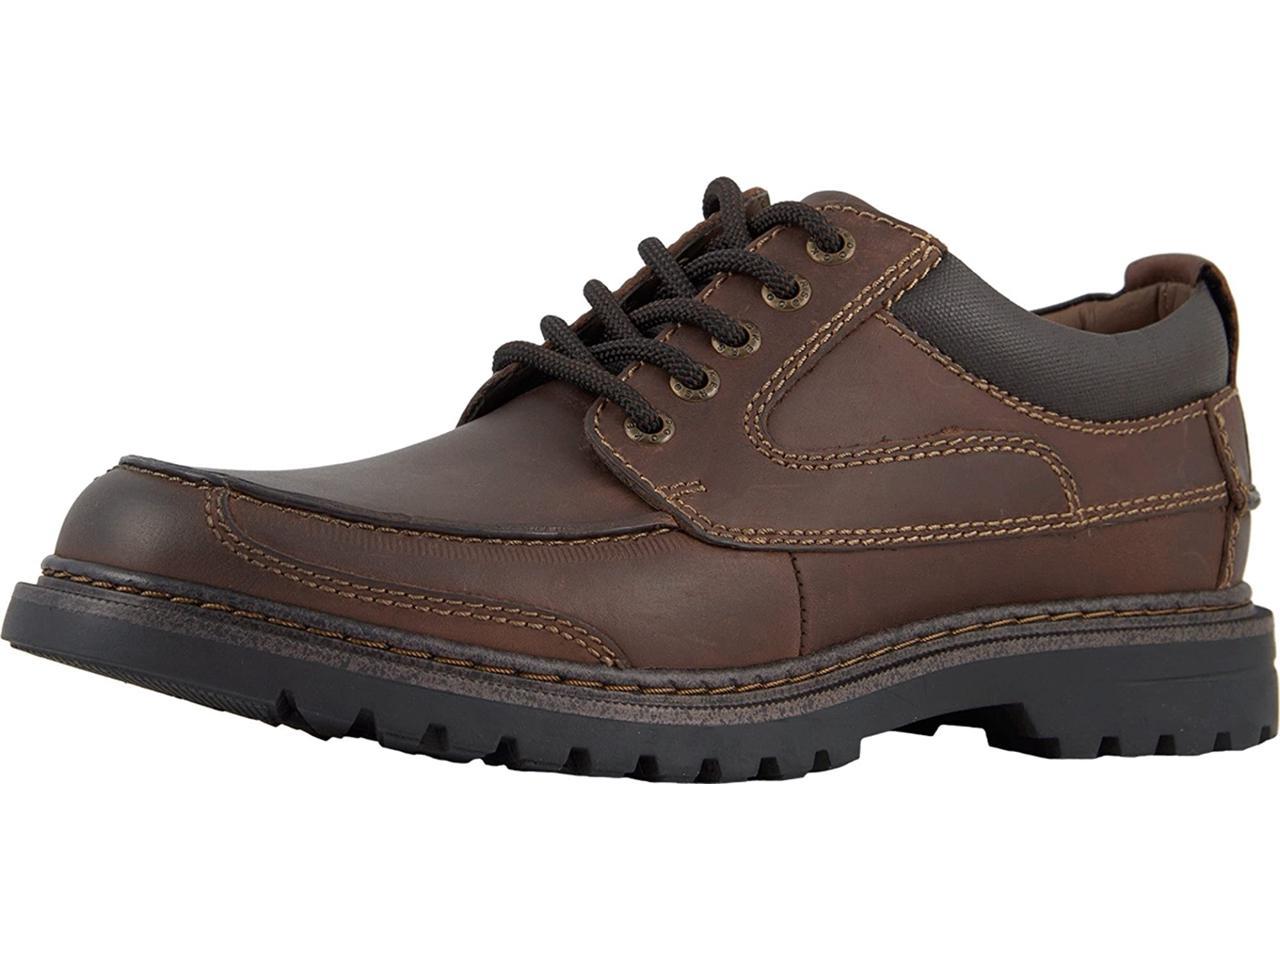 Dockers Mens Overton Leather Rugged Casual Oxford Shoe with Stain ...